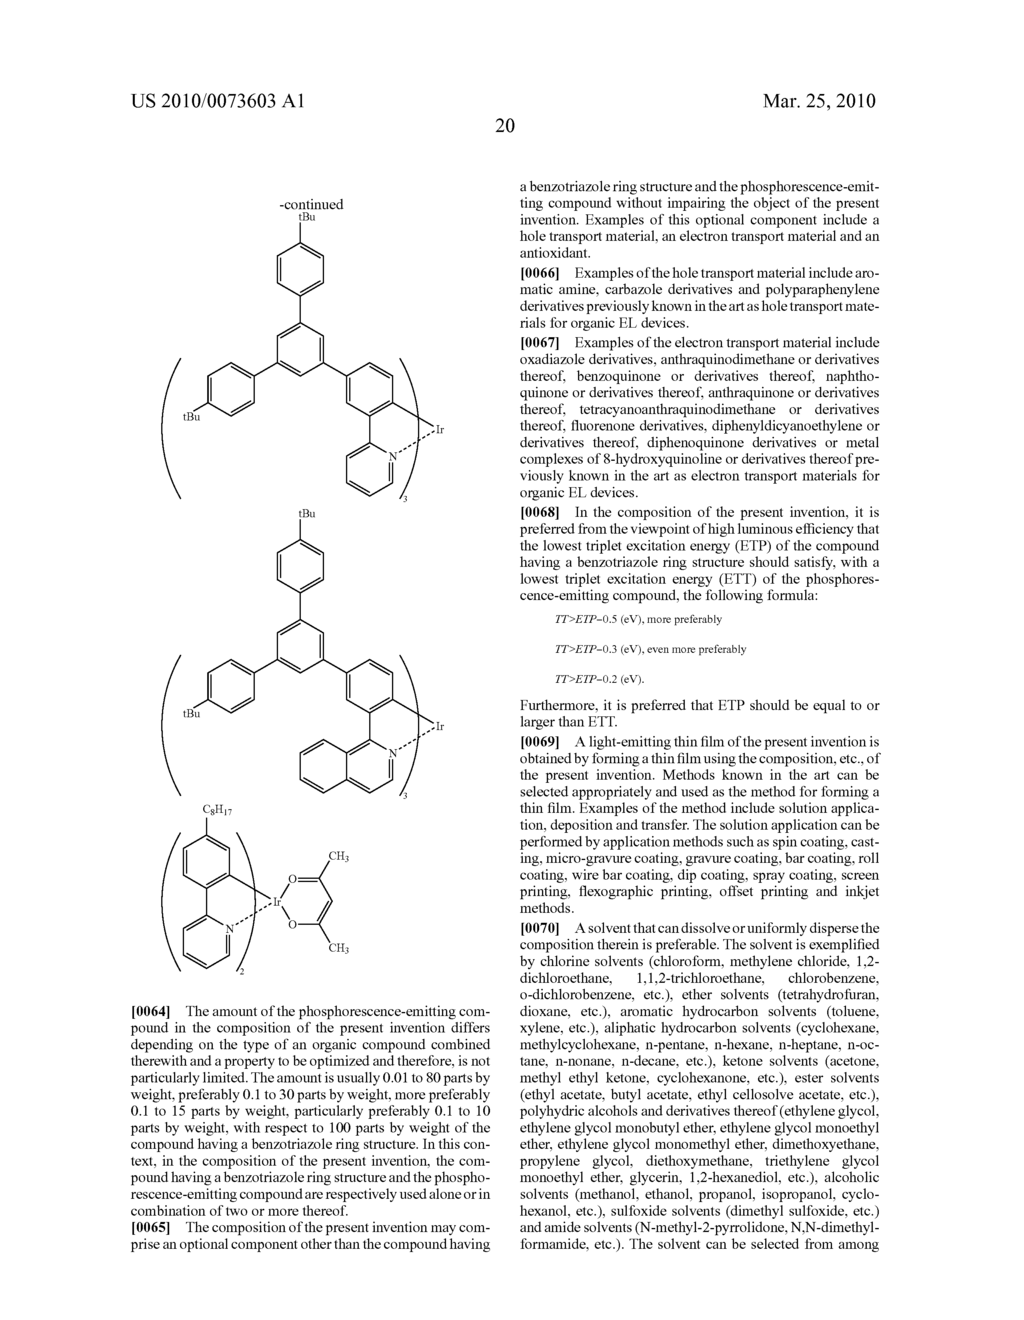 BENZOTRIAZOLE COMPOUND-CONTAINING COMPOSITION AND LIGHT-EMITTING DEVICE USING THE COMPOSITION - diagram, schematic, and image 21